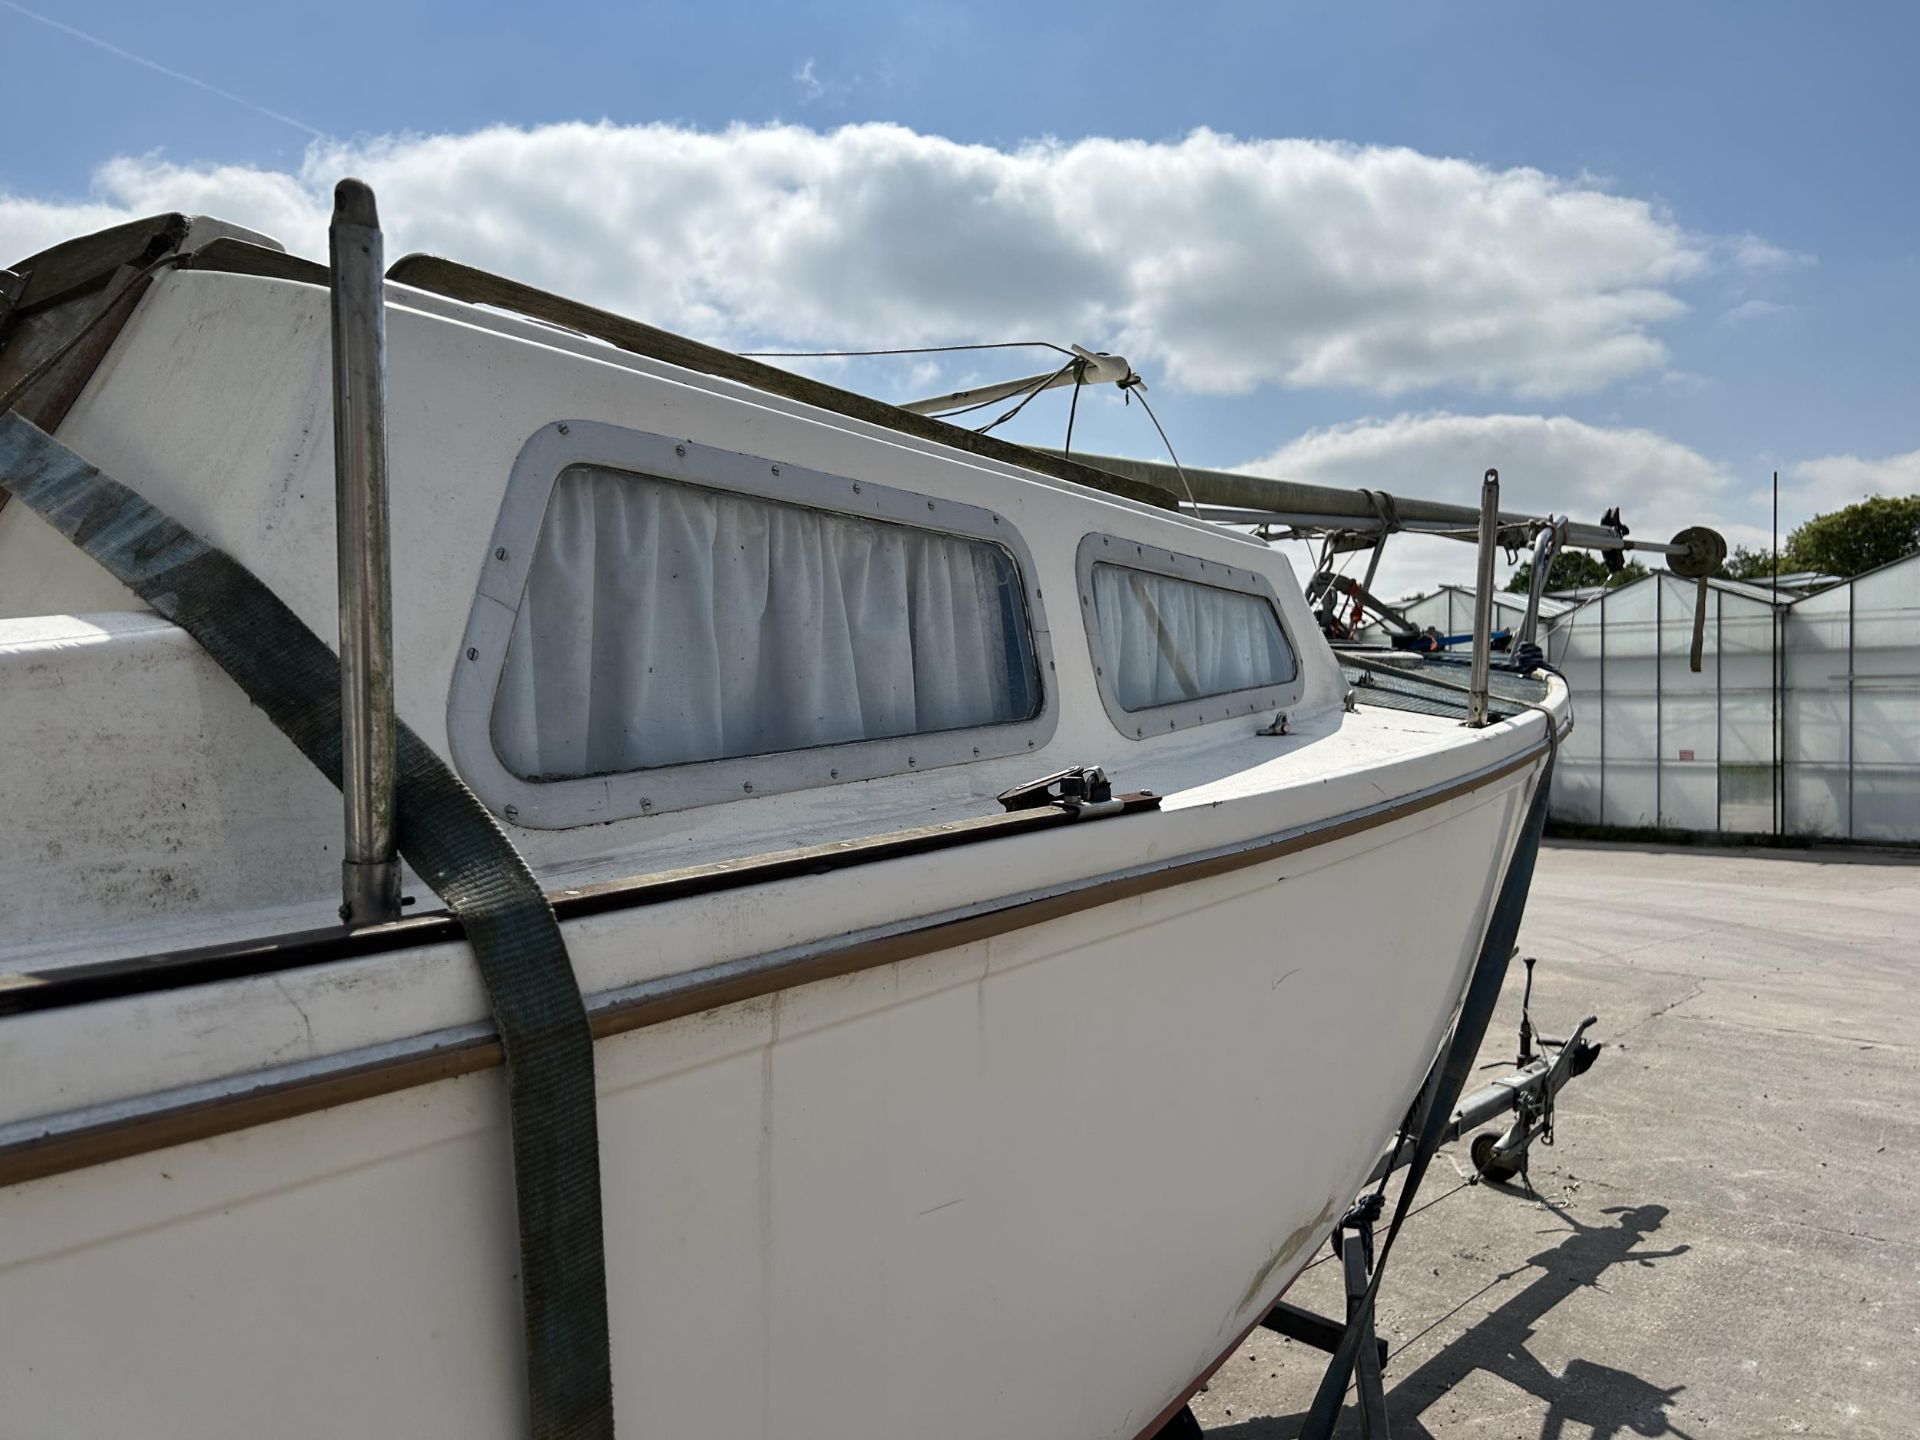 A JAGUAR 22 YACHT (ONLY THE YACHT, NOT TRAILER WHICH IS AVAILABLE AT AN EXTRA COST OF £1200) NEW - Image 8 of 8